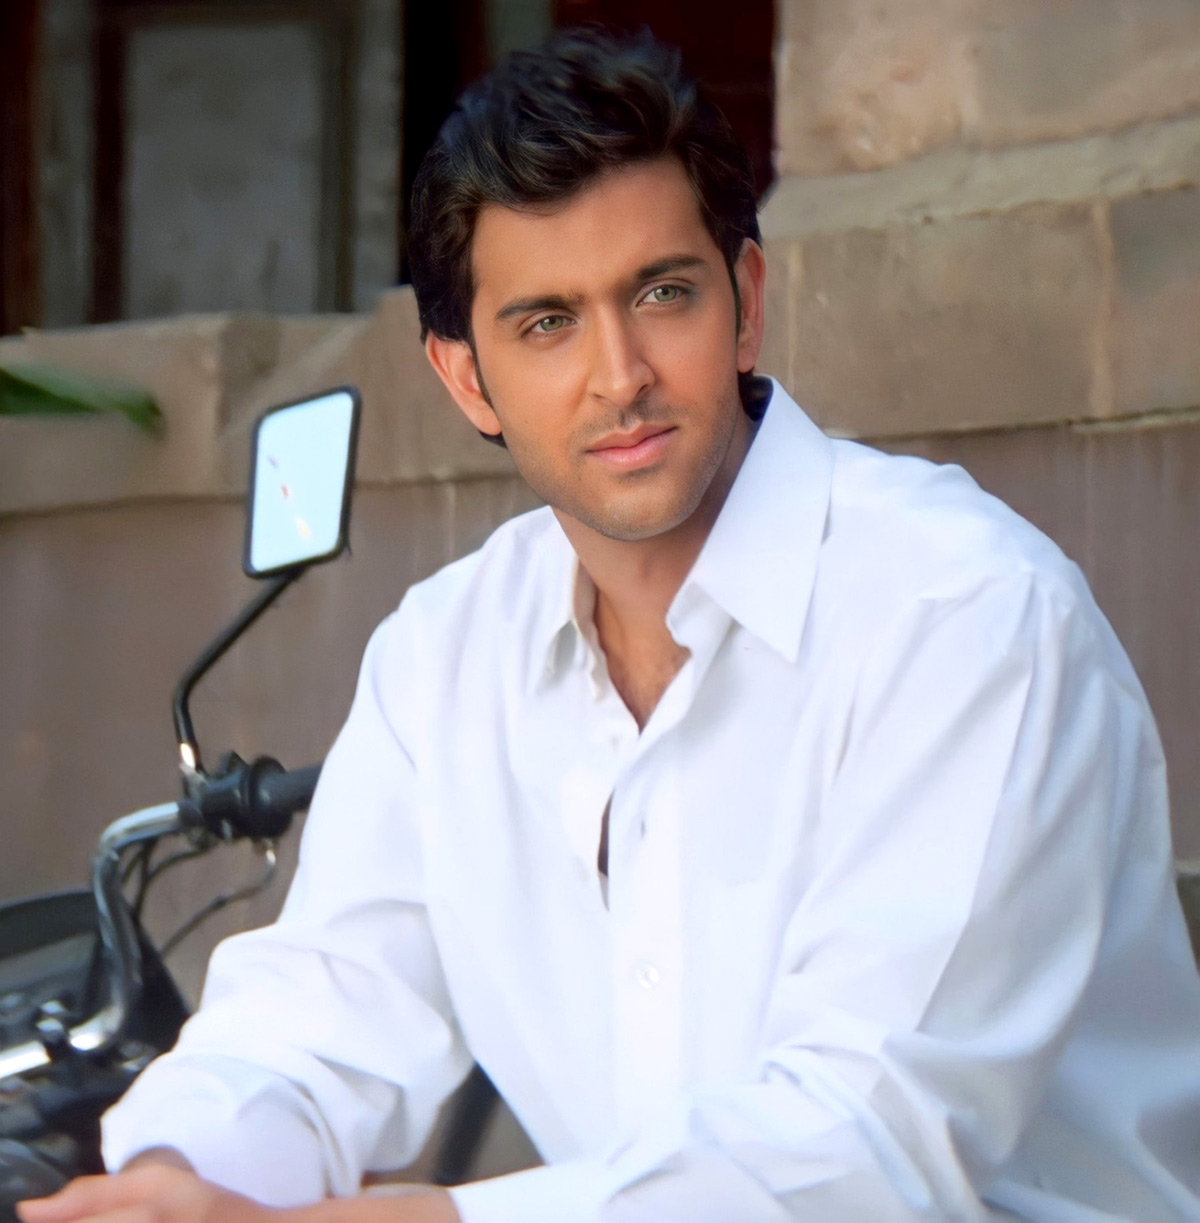 The Hrithik Roshan You Don't Know